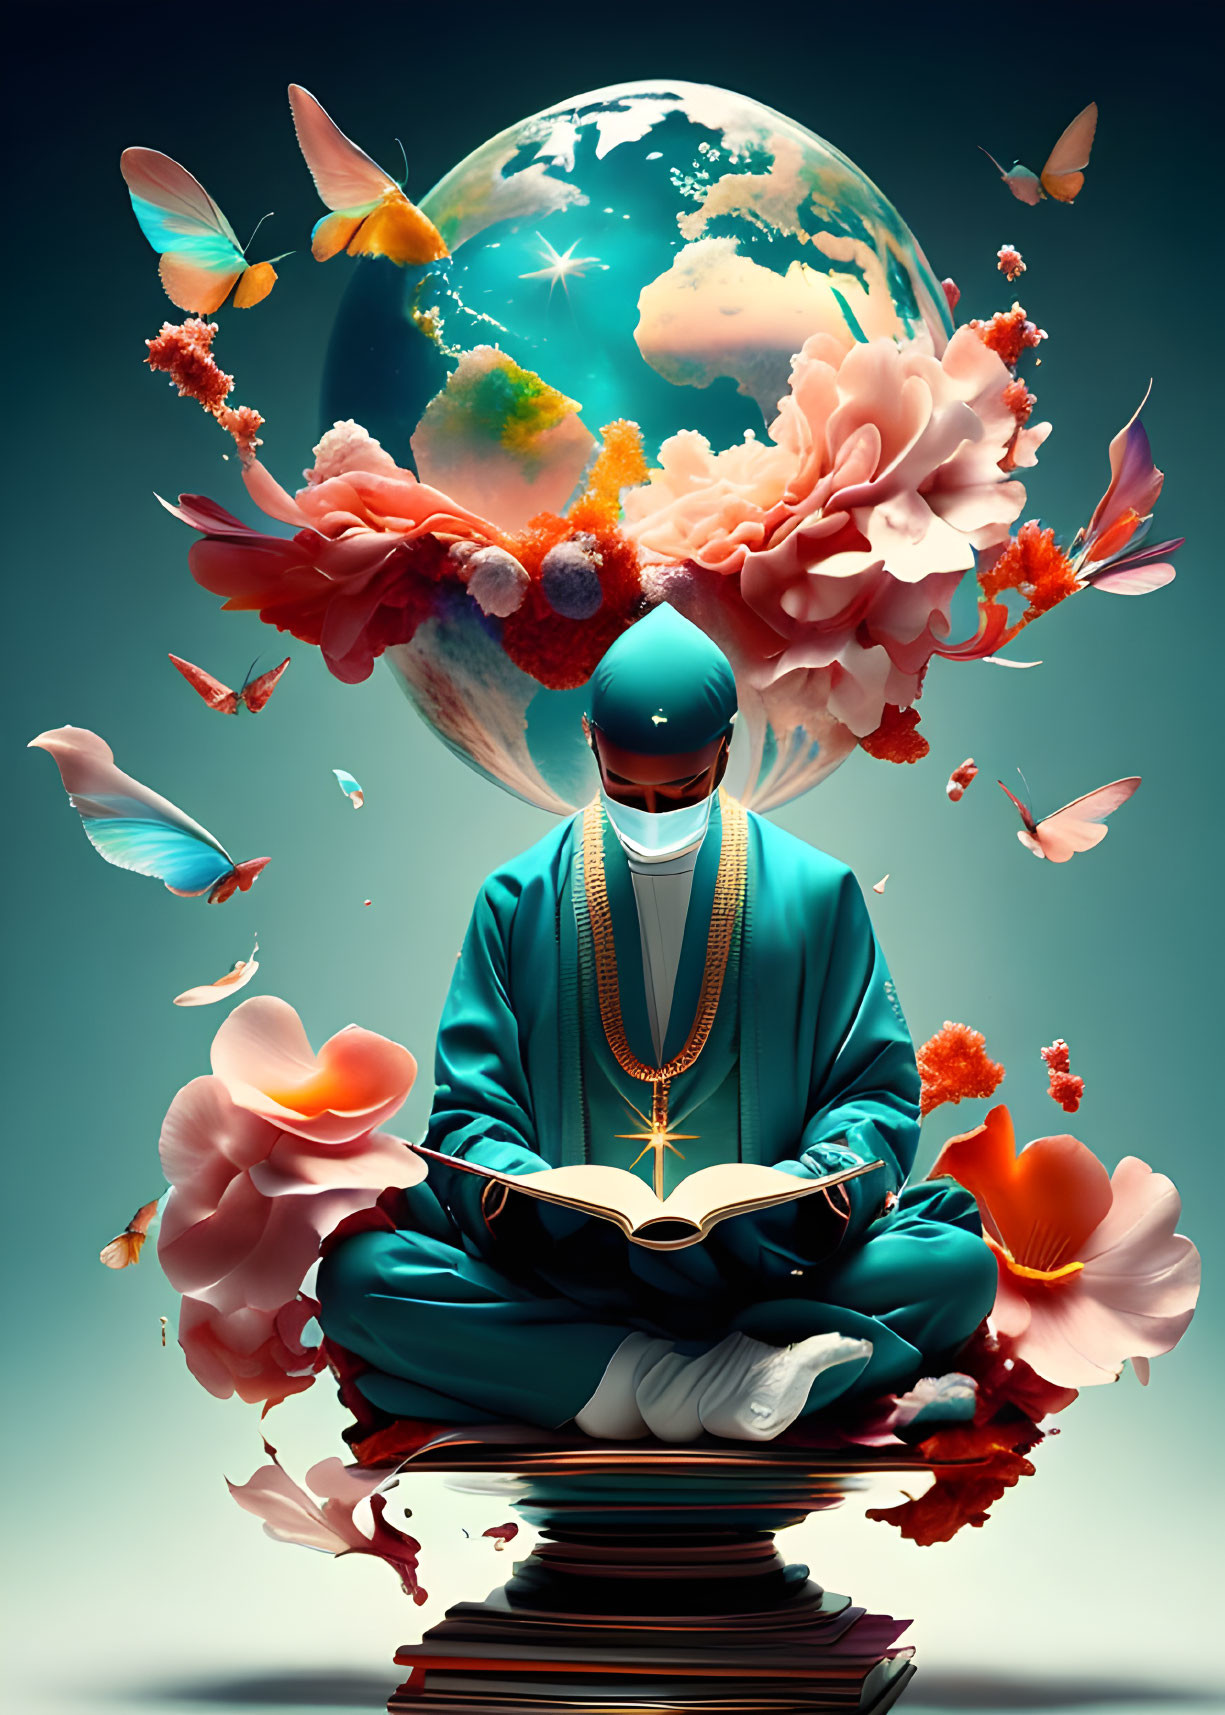 Surreal image: Person in scrubs meditating on books with Earth, flowers, butterflies